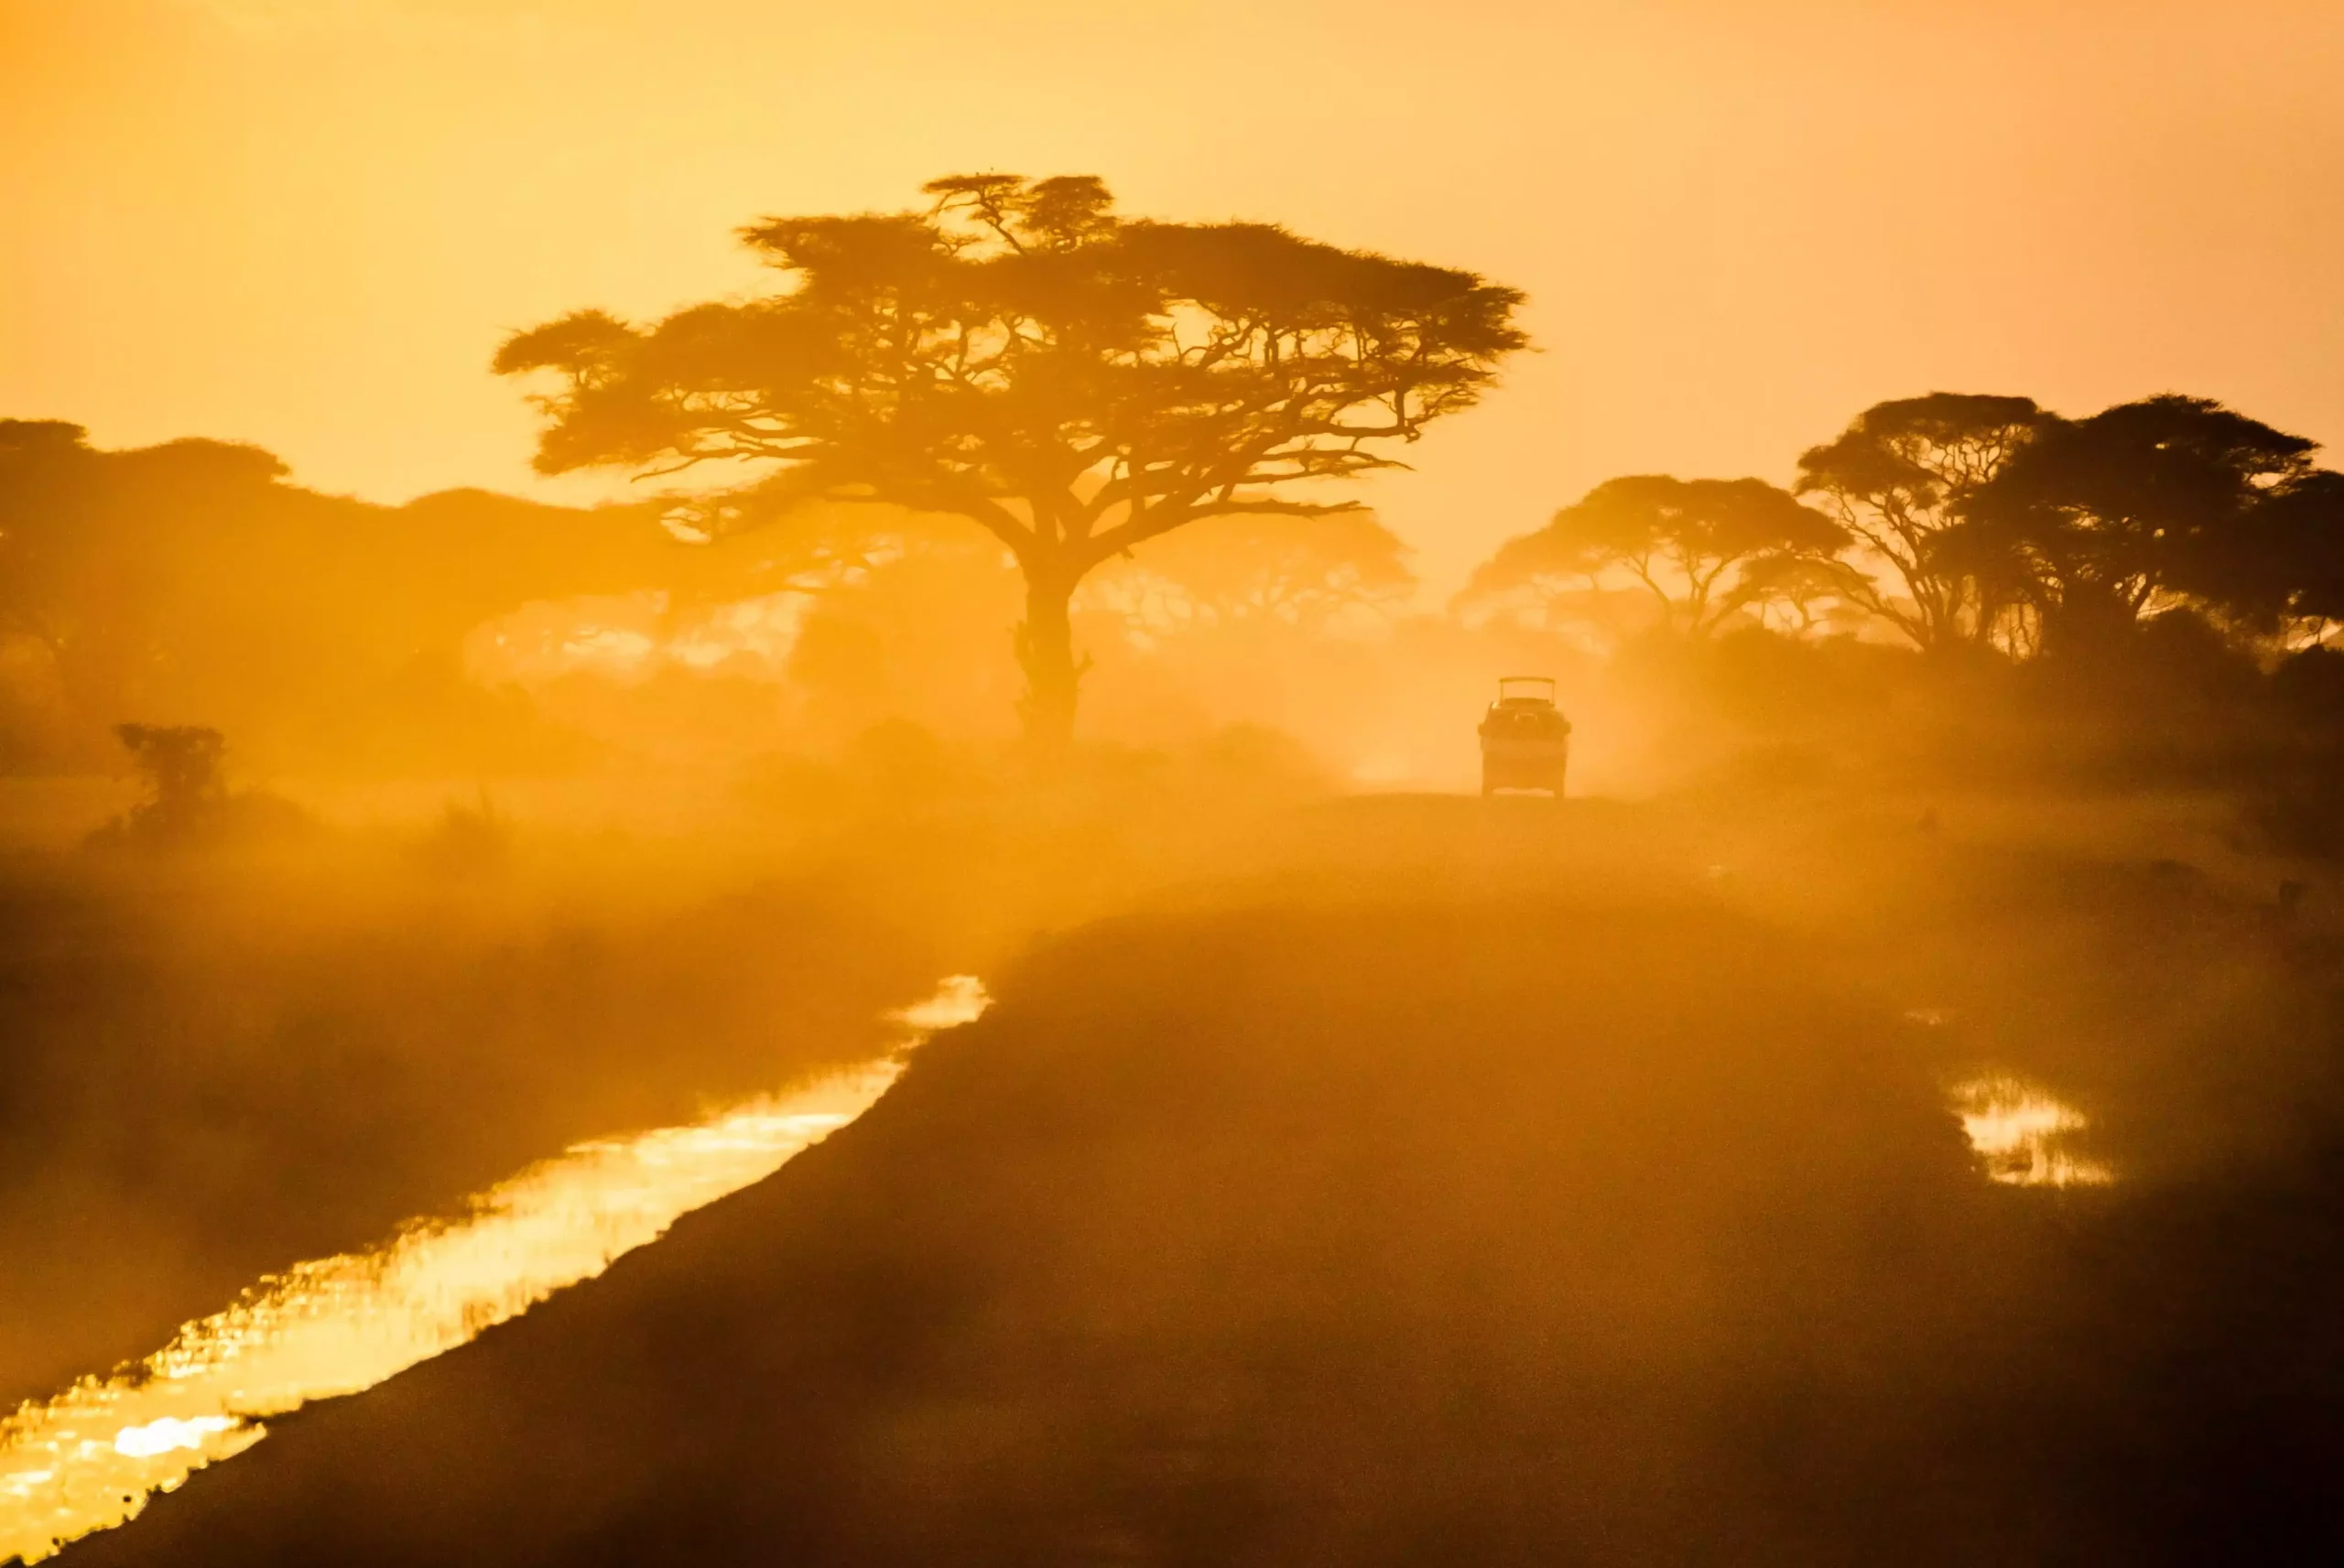 A vehicle drives down a dusty Kenyan road at the golden sunset hour